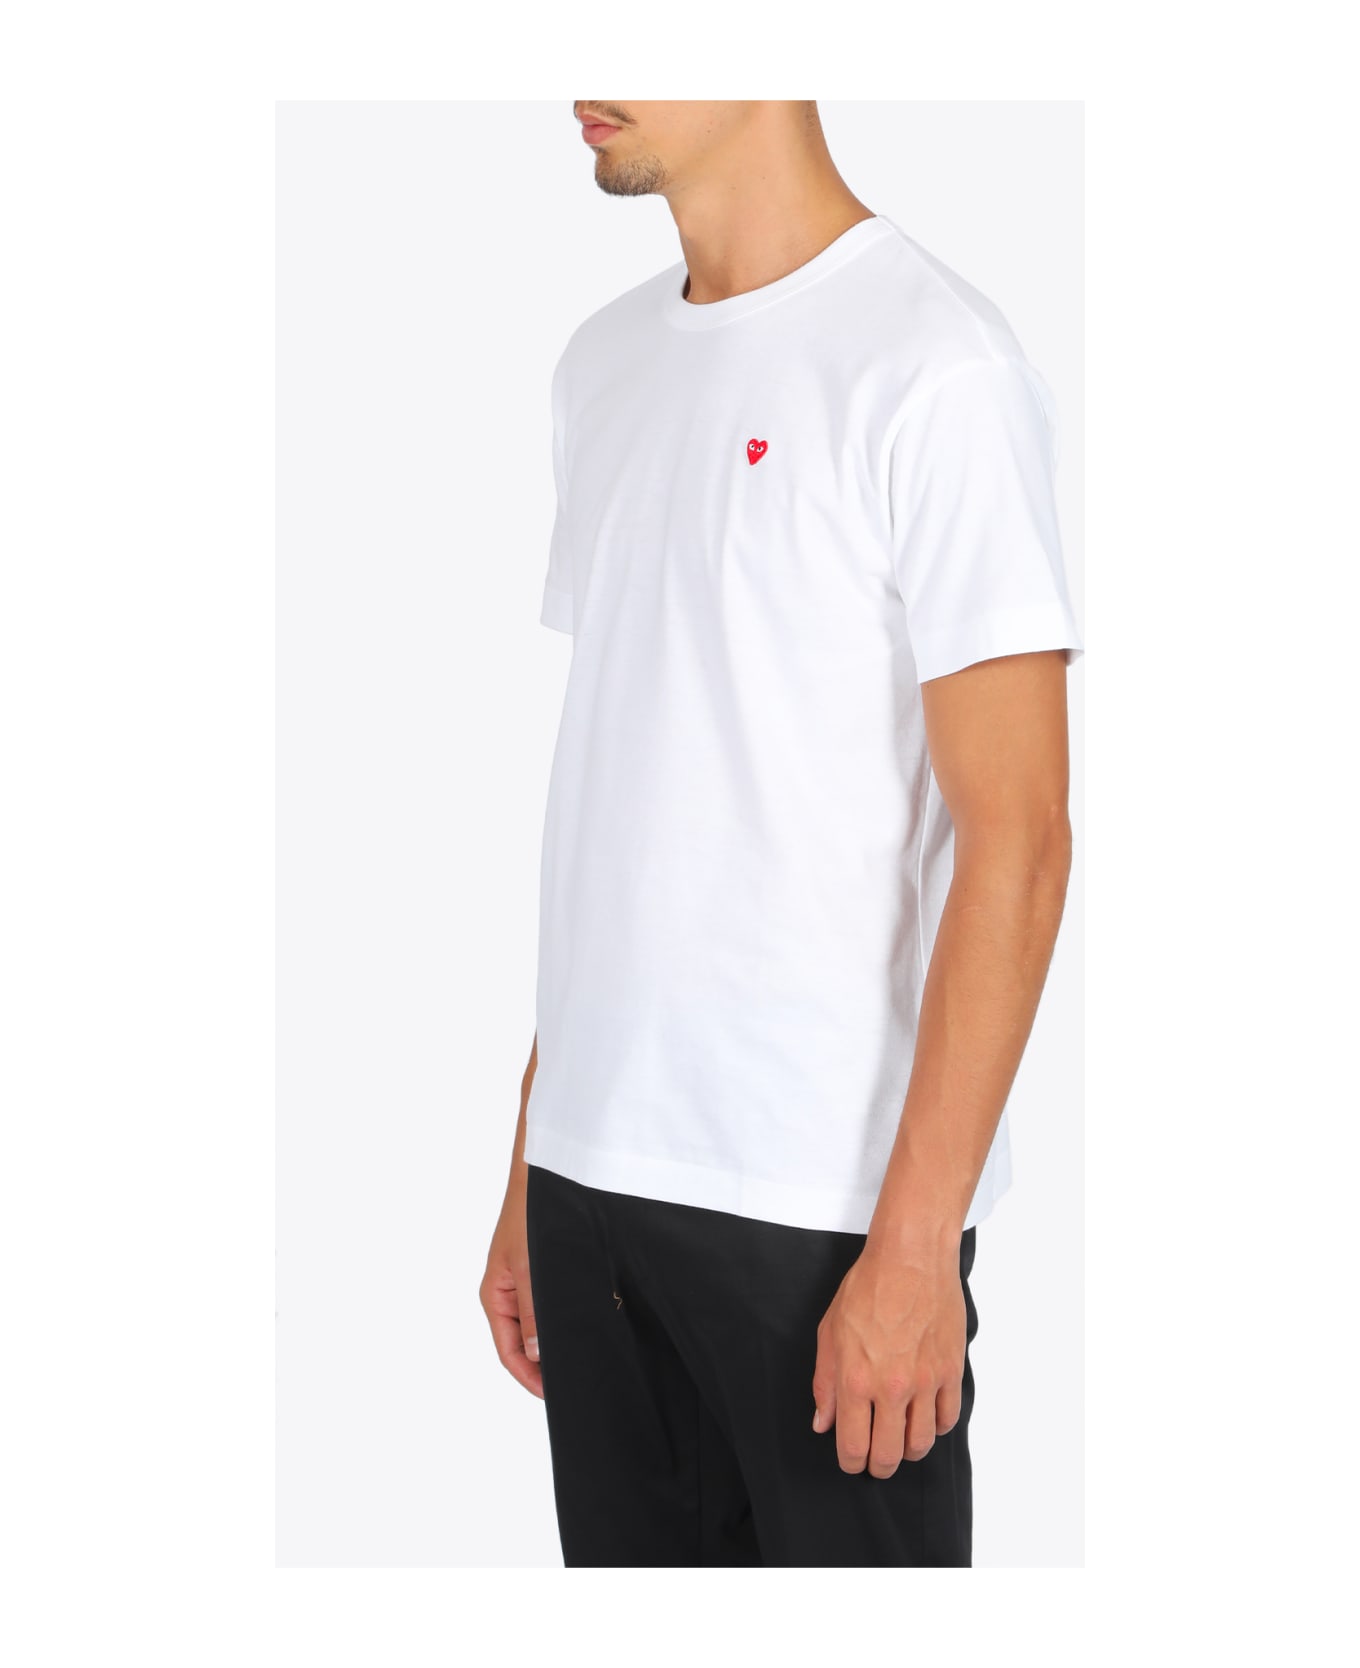 Comme des Garçons Play Small Heart Patch T-shirt White cotton t-shirt with small heart - Bianco